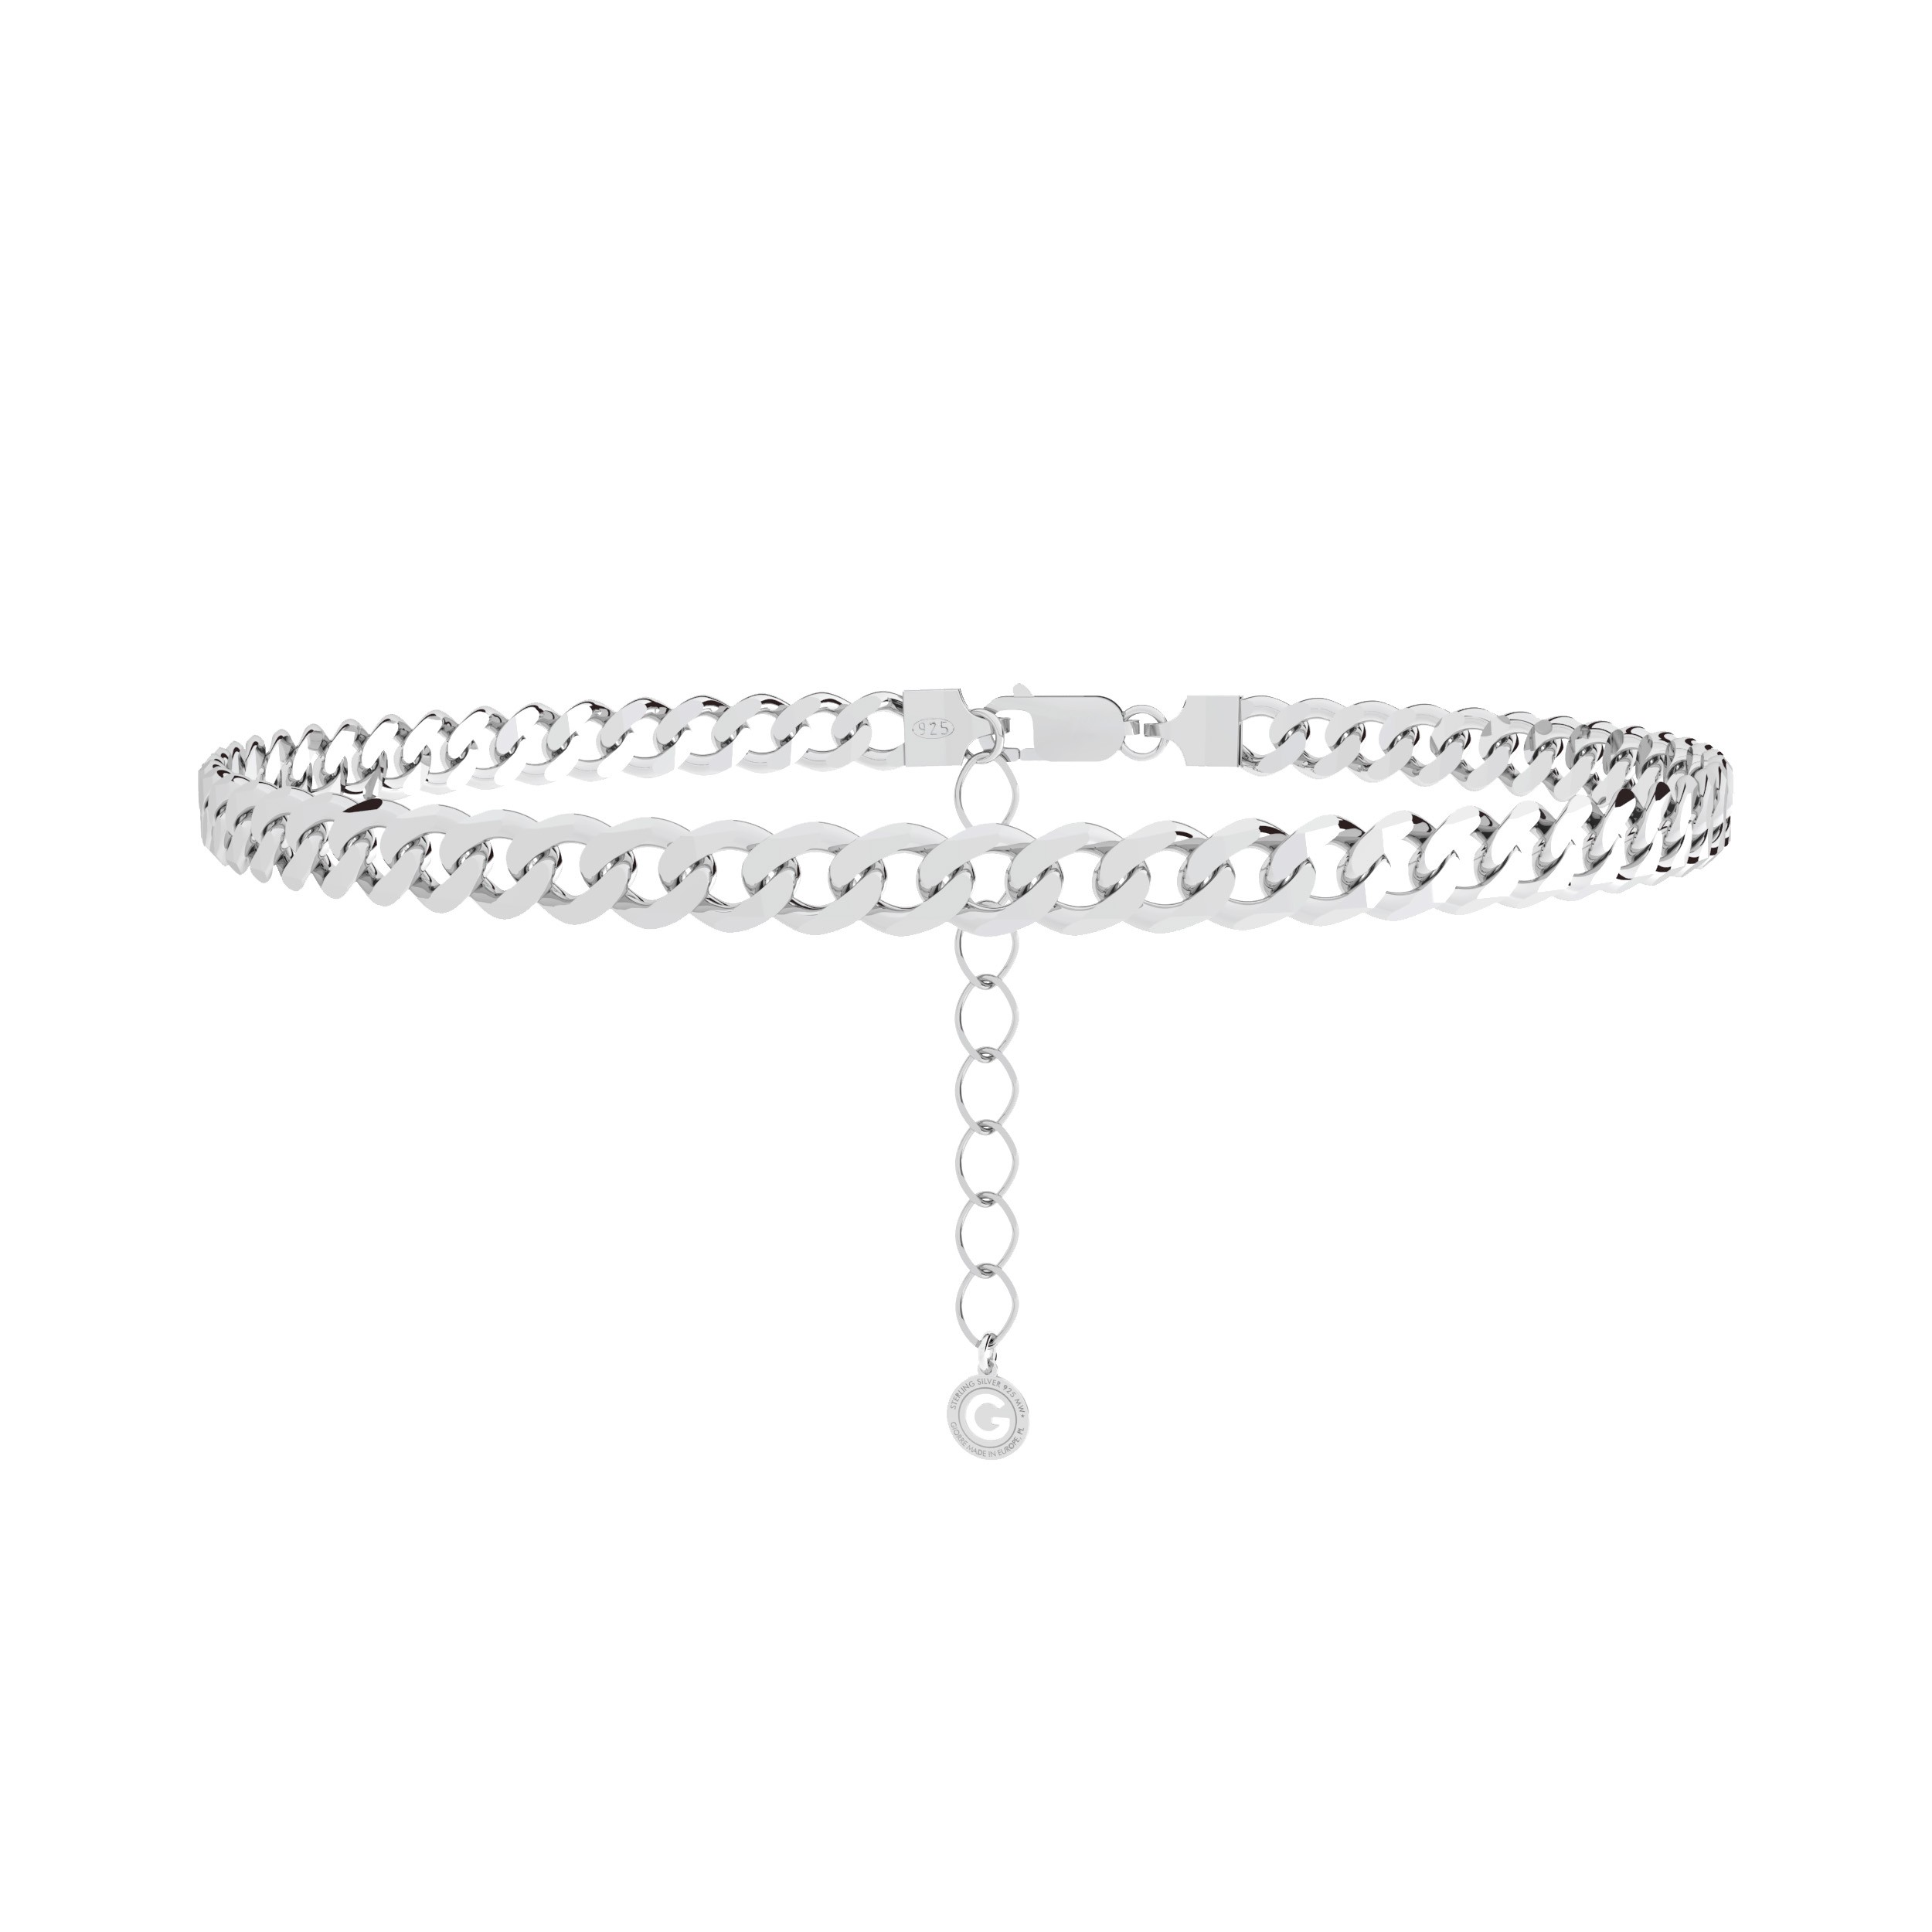 Silver chain necklace curb choker 925